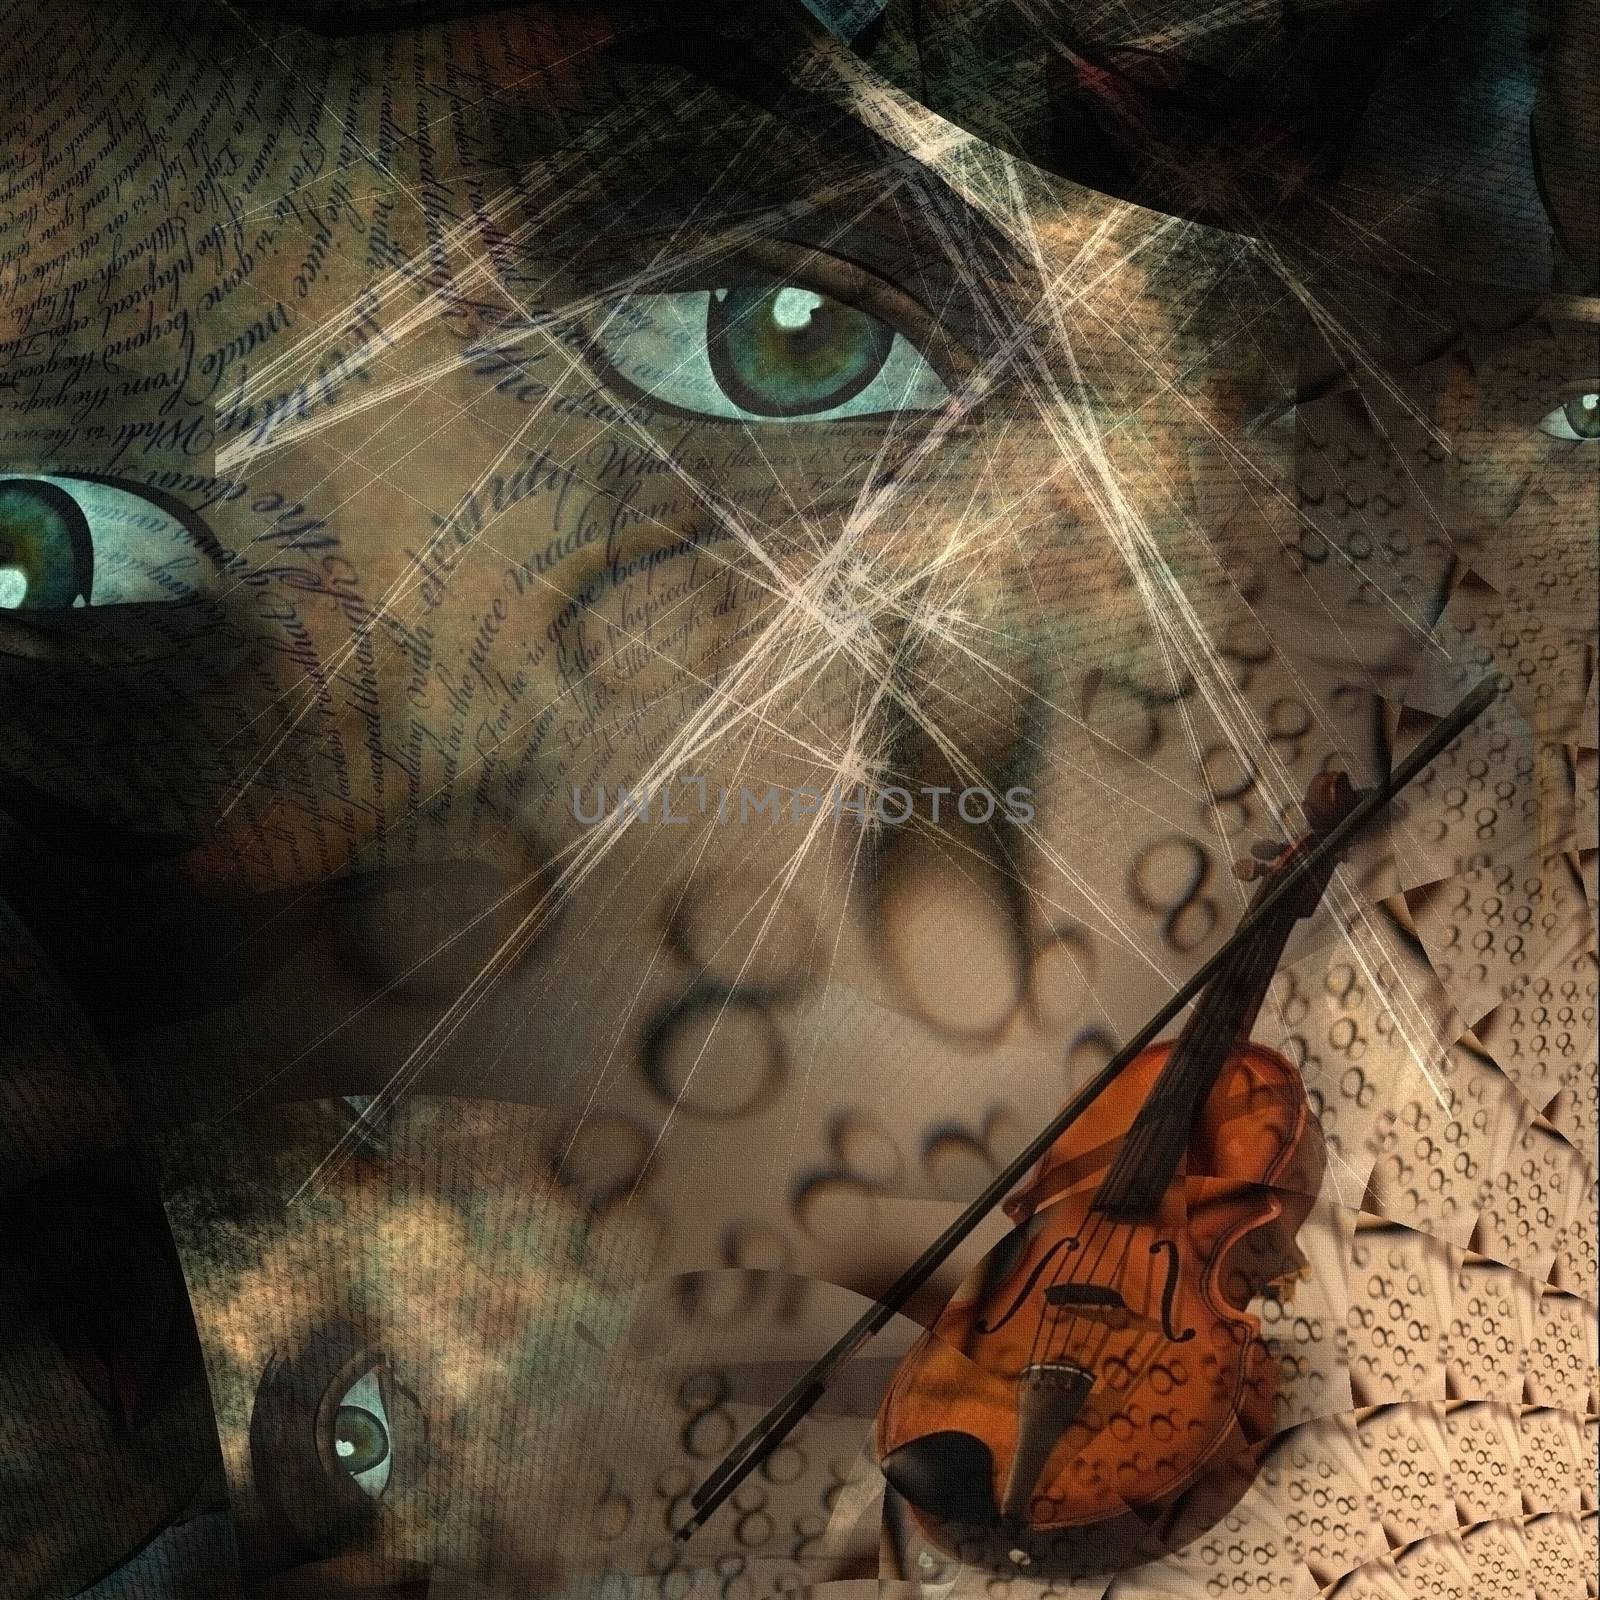 Eternal Music. Violin and eye abstract composition